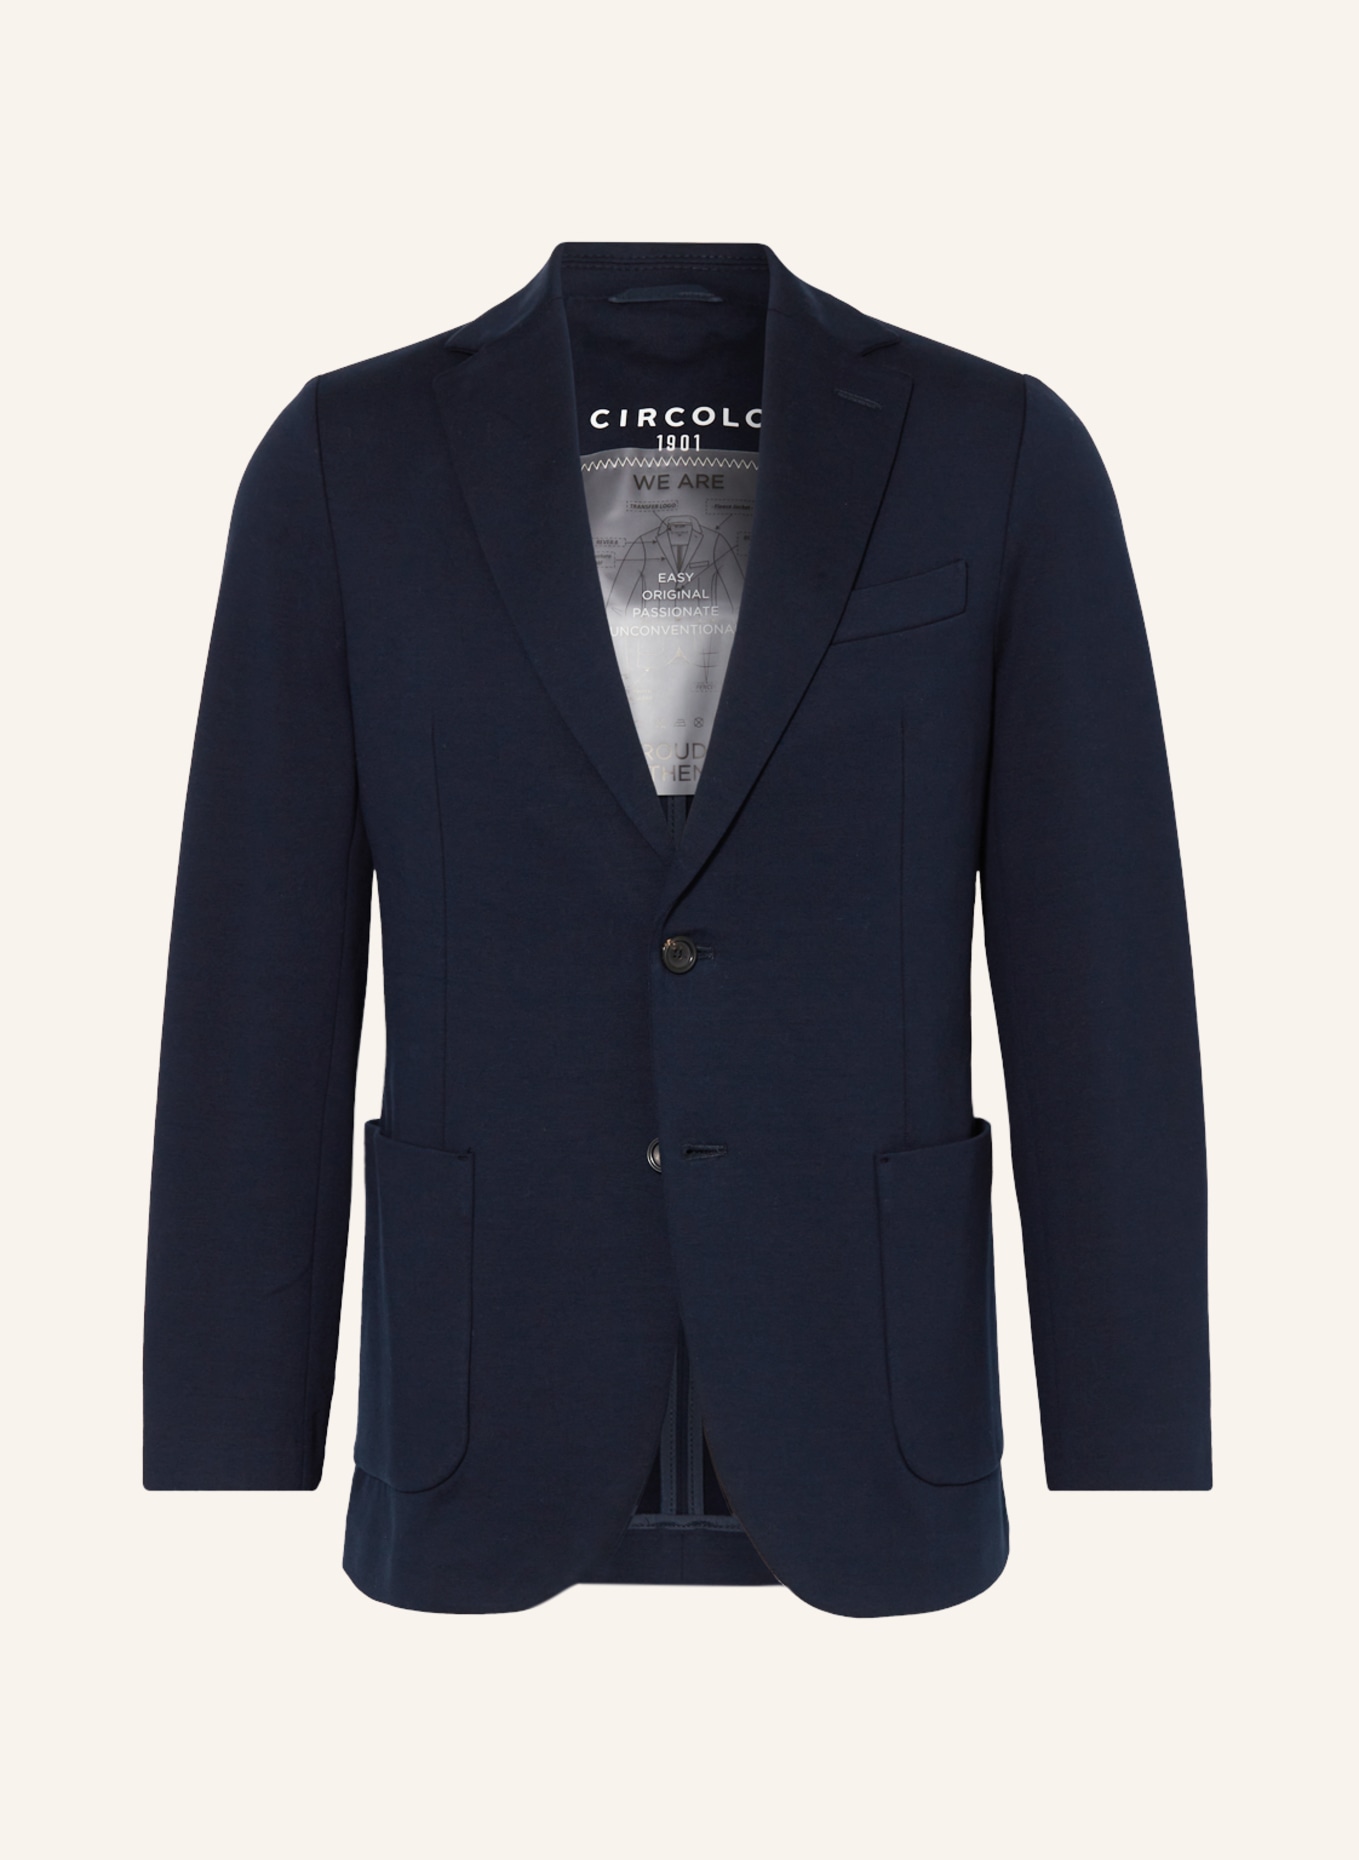 CIRCOLO 1901 Suit jacket extra slim fit made of jersey, Color: 447 Blu Navy (Image 1)